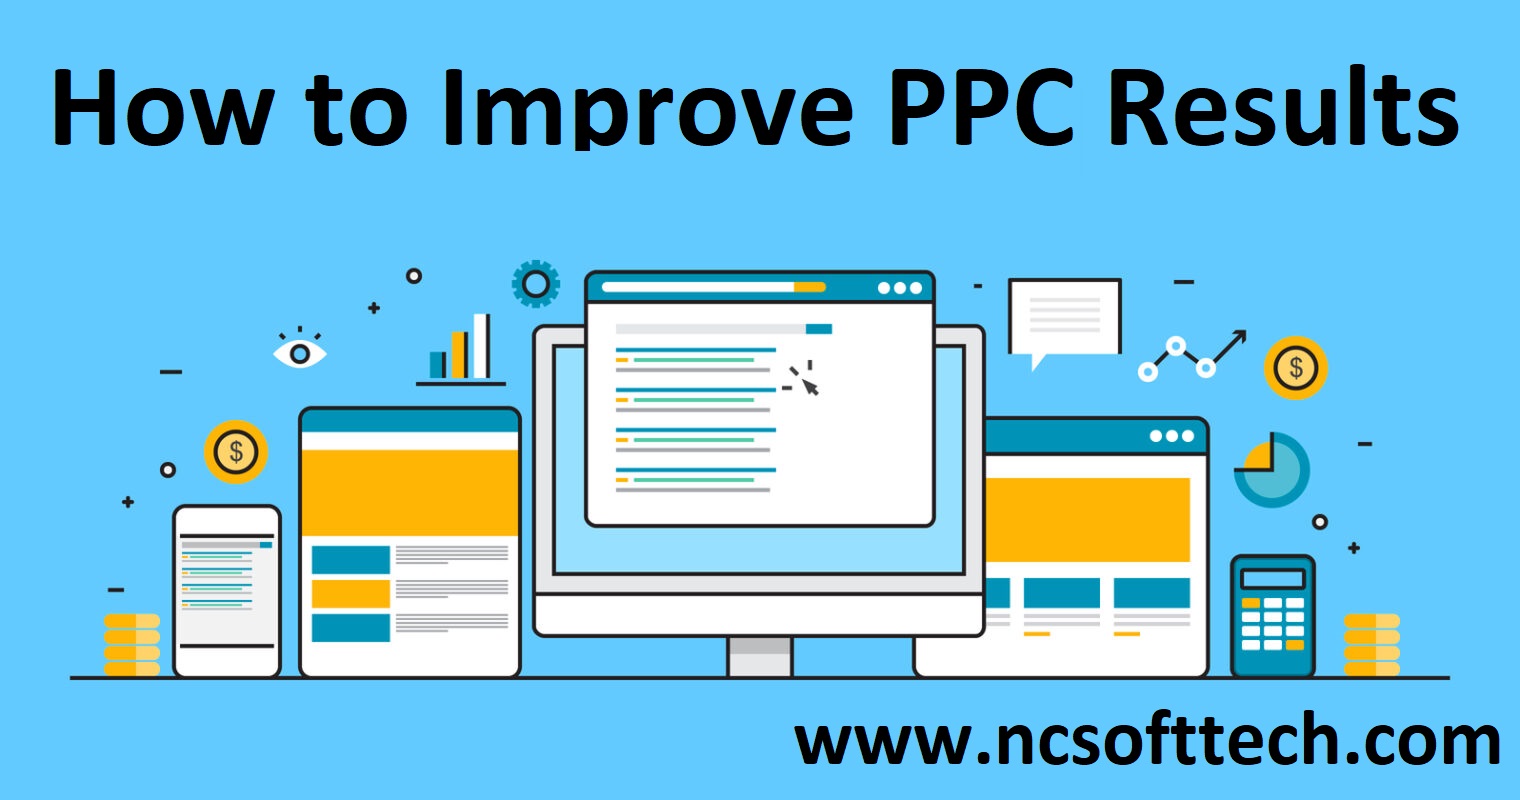 Top 4 Practical Tips On How to Improve PPC Results